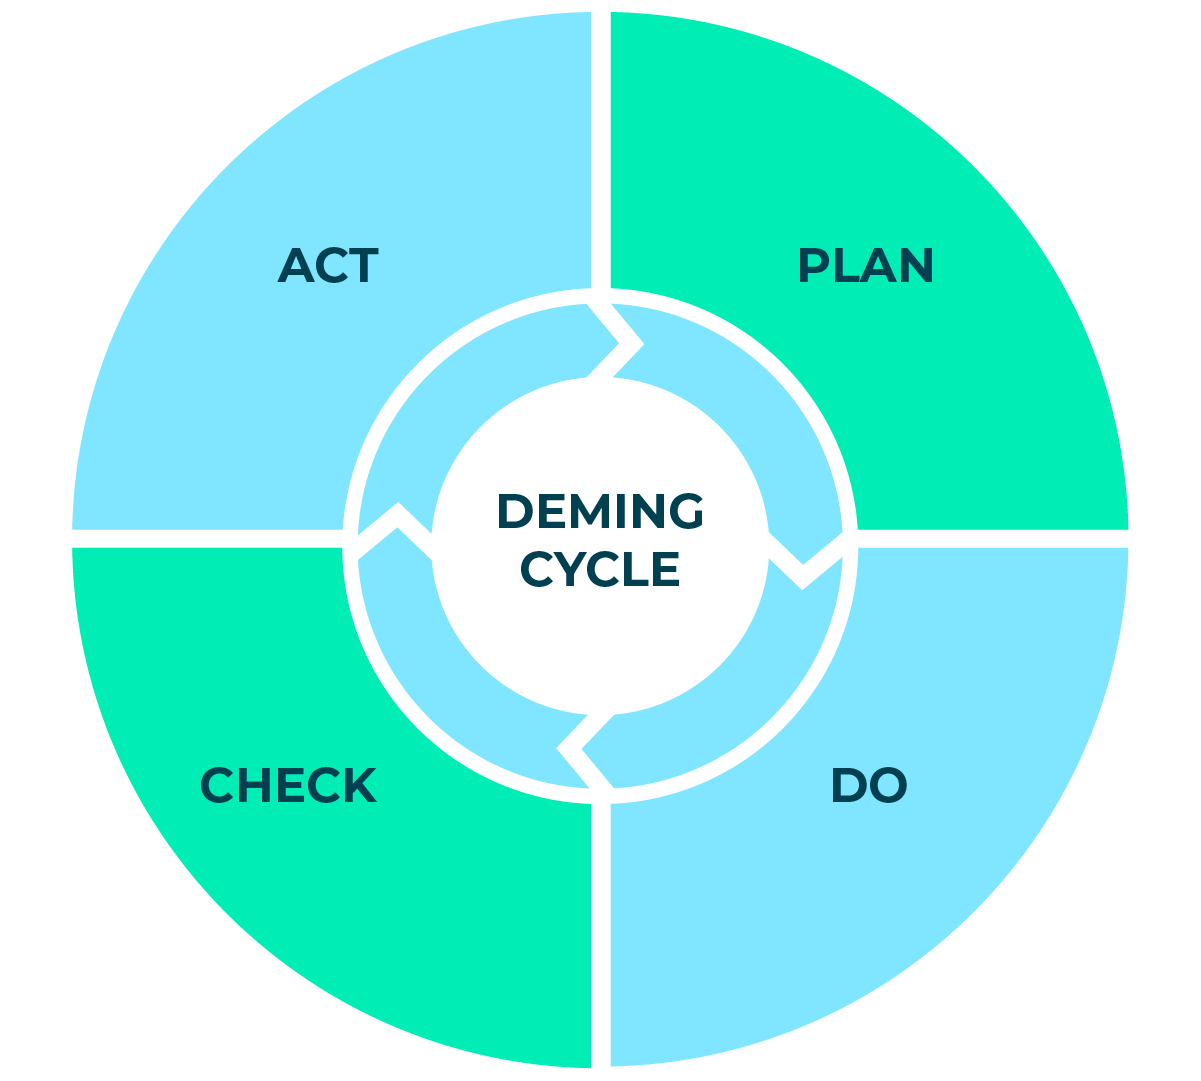 The iterative Deming cycle of Plan-Do-Check-Act.